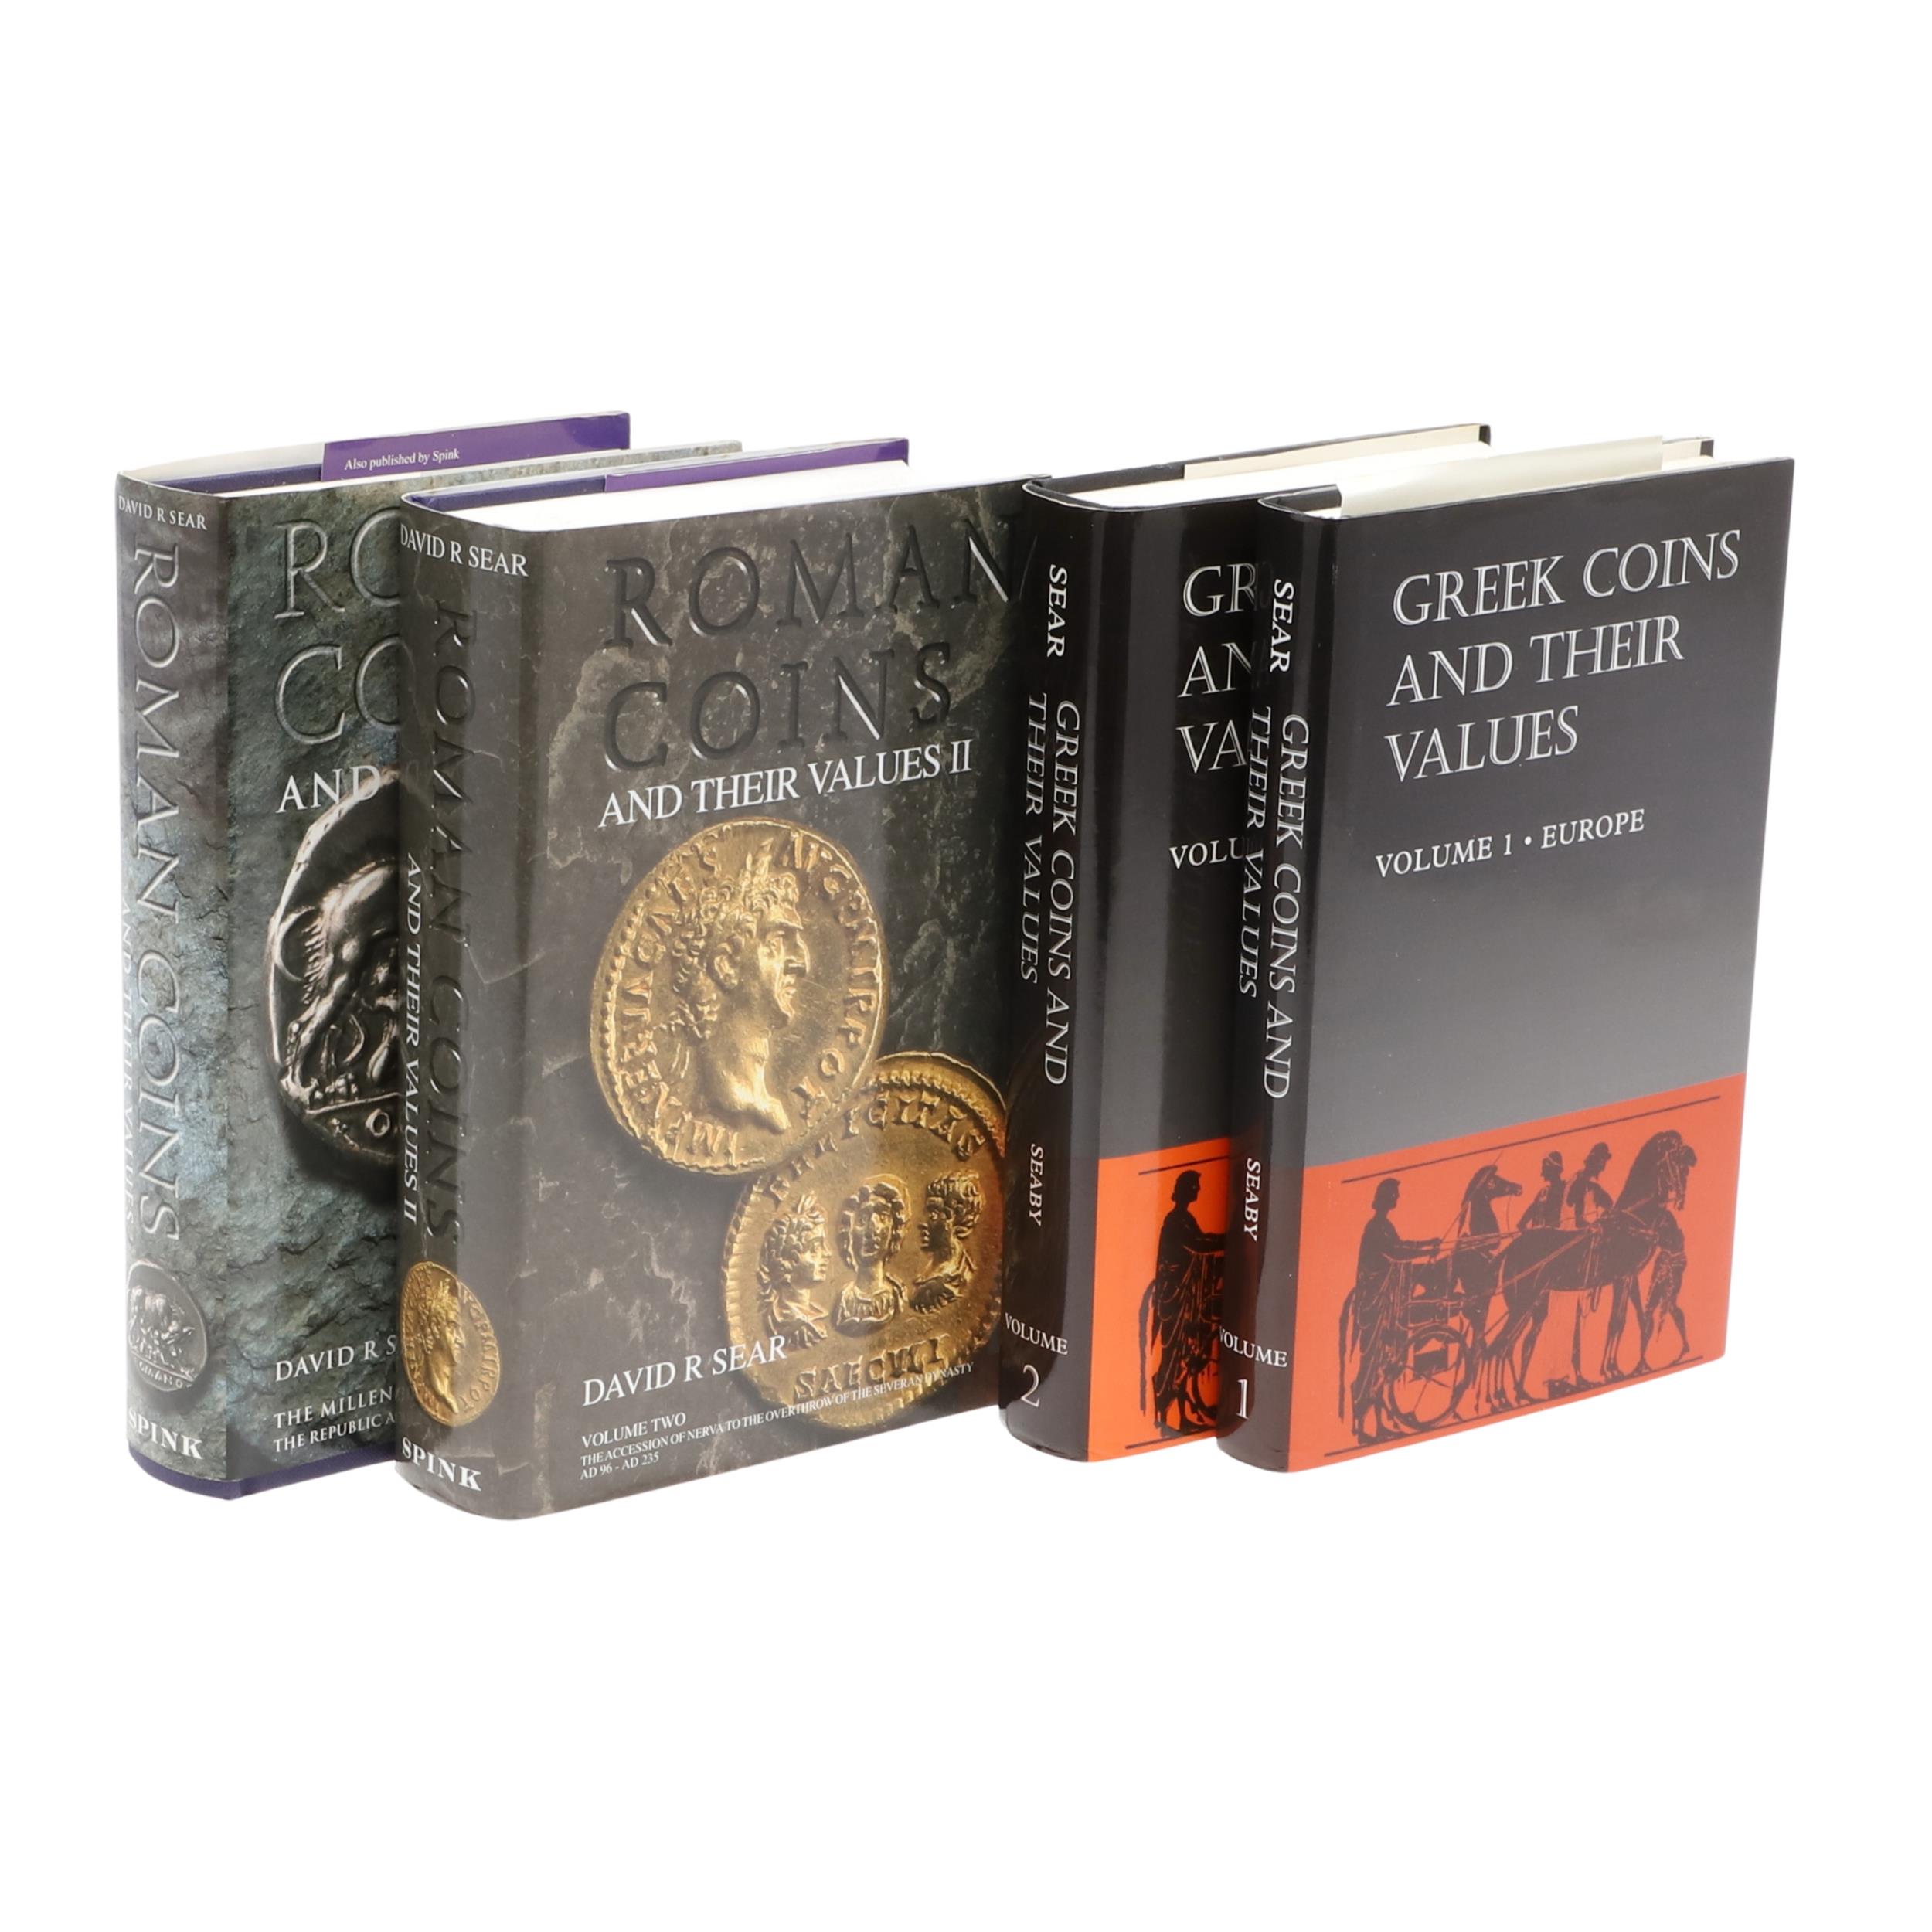 DAVID R. SEAR GREEK COINS AND THEIR VALUES AND ROMAN COINS AND THEIR VALUES. 4 VOLUMES.